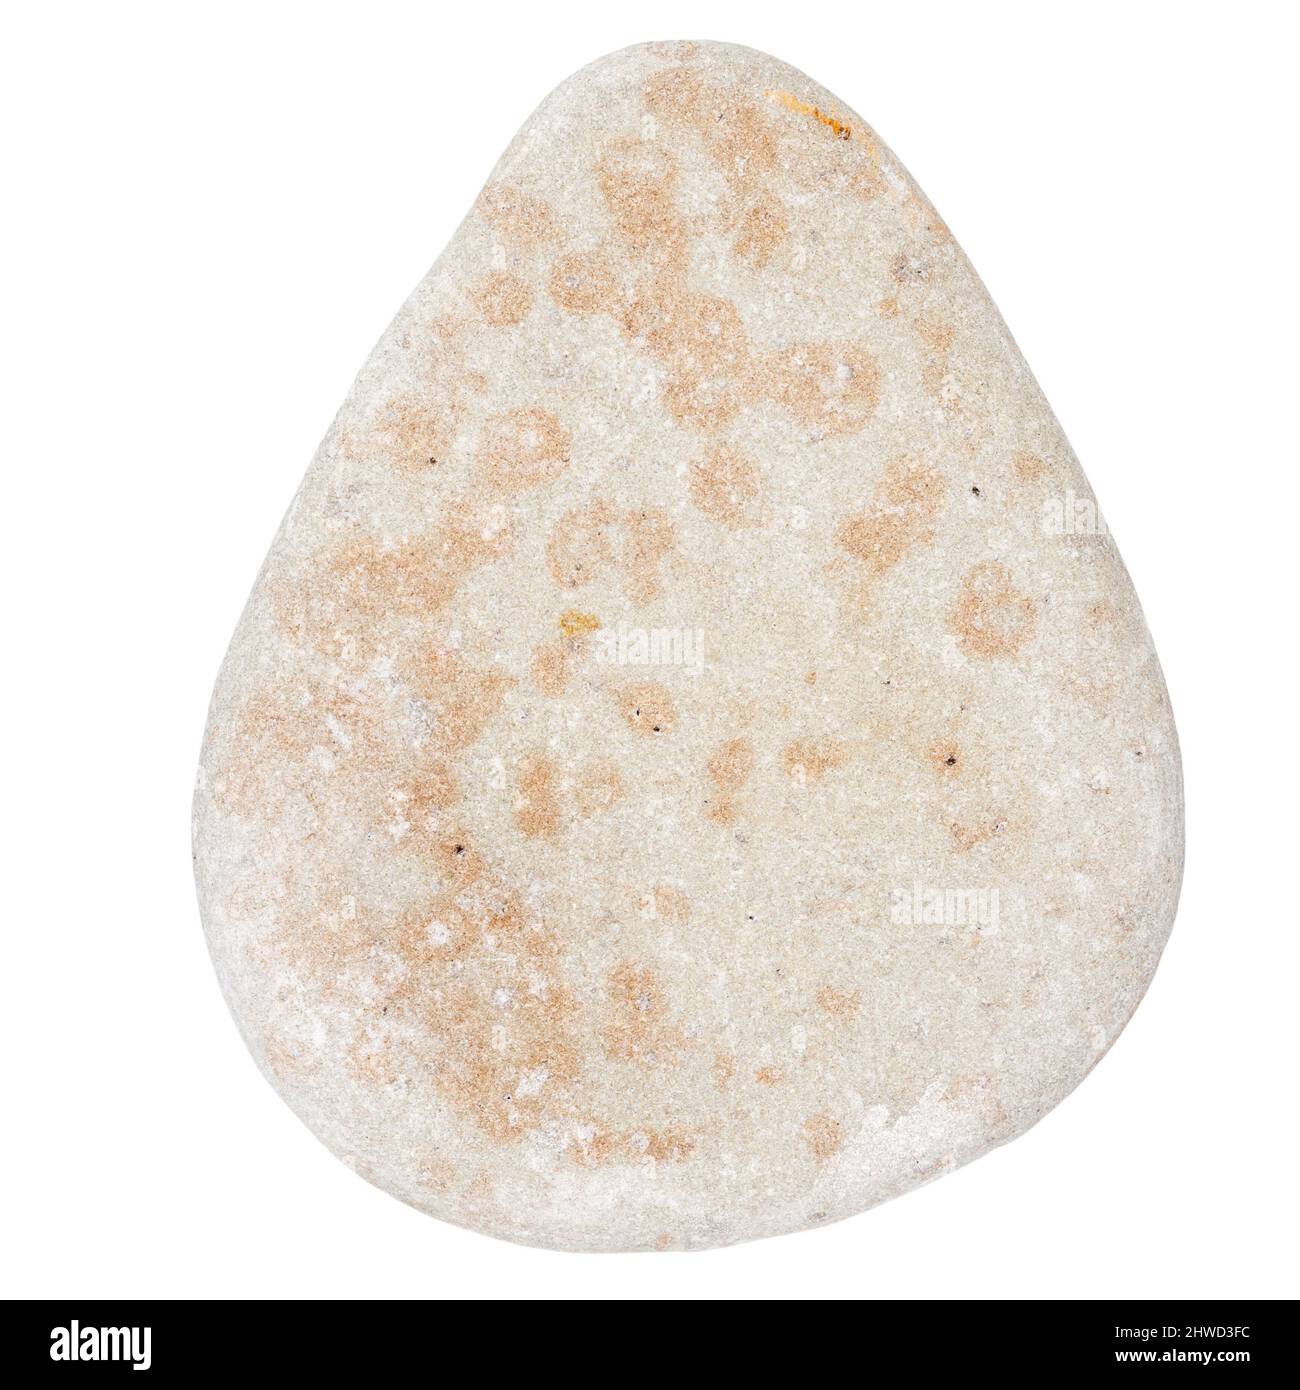 Top view of single gray pebble isolated on white background. Stock Photo